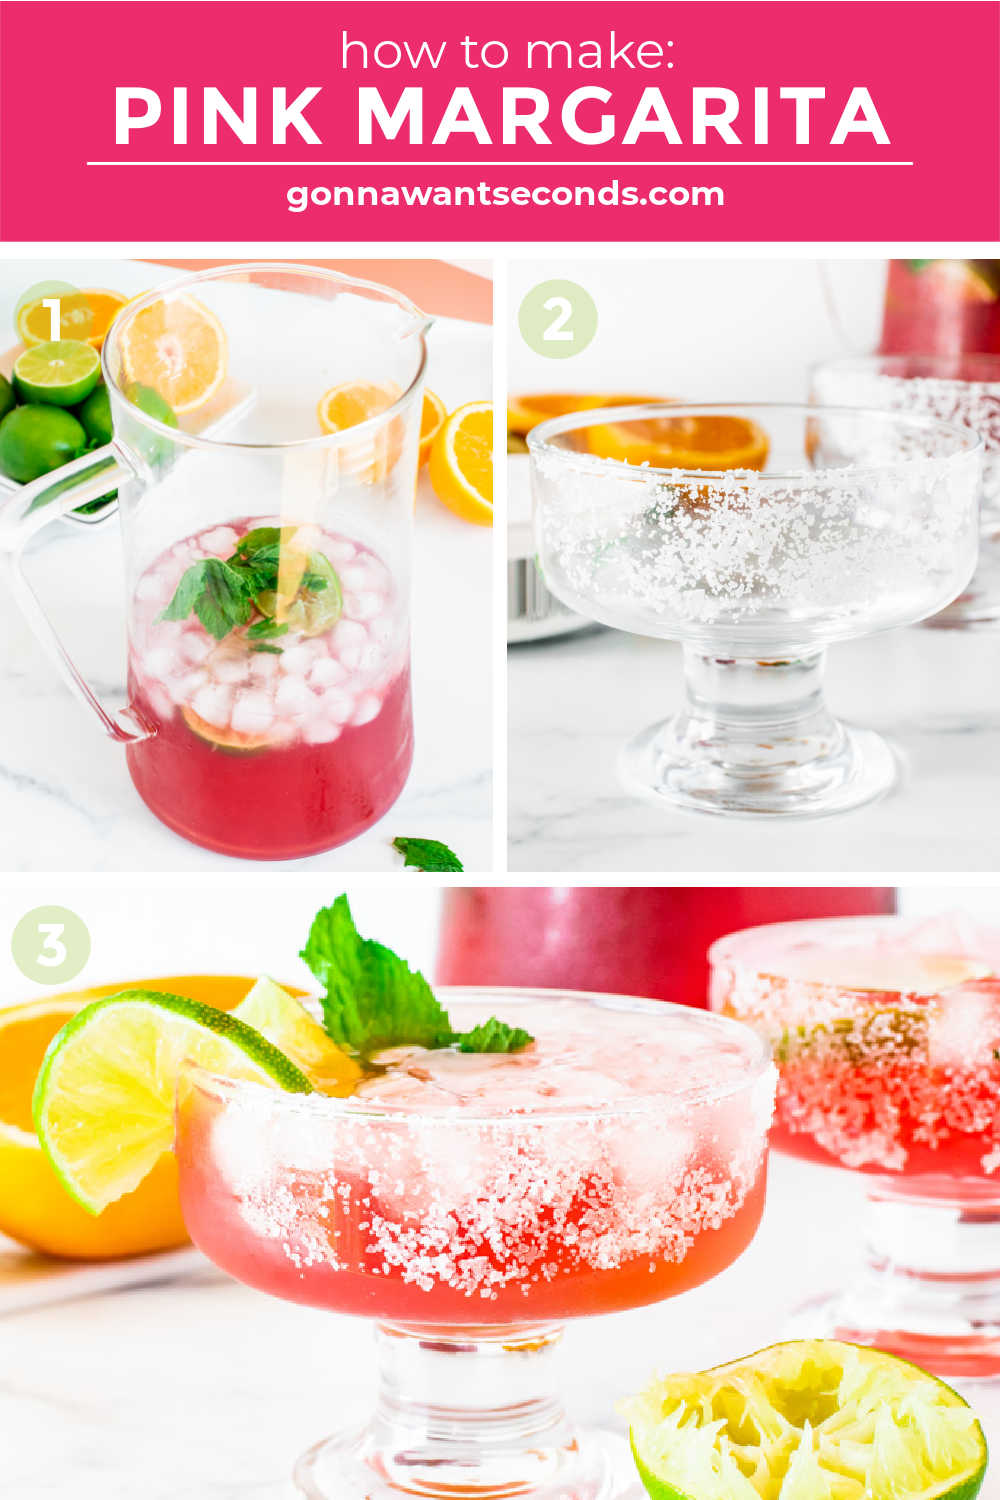 Step by step how to make Pink Margarita